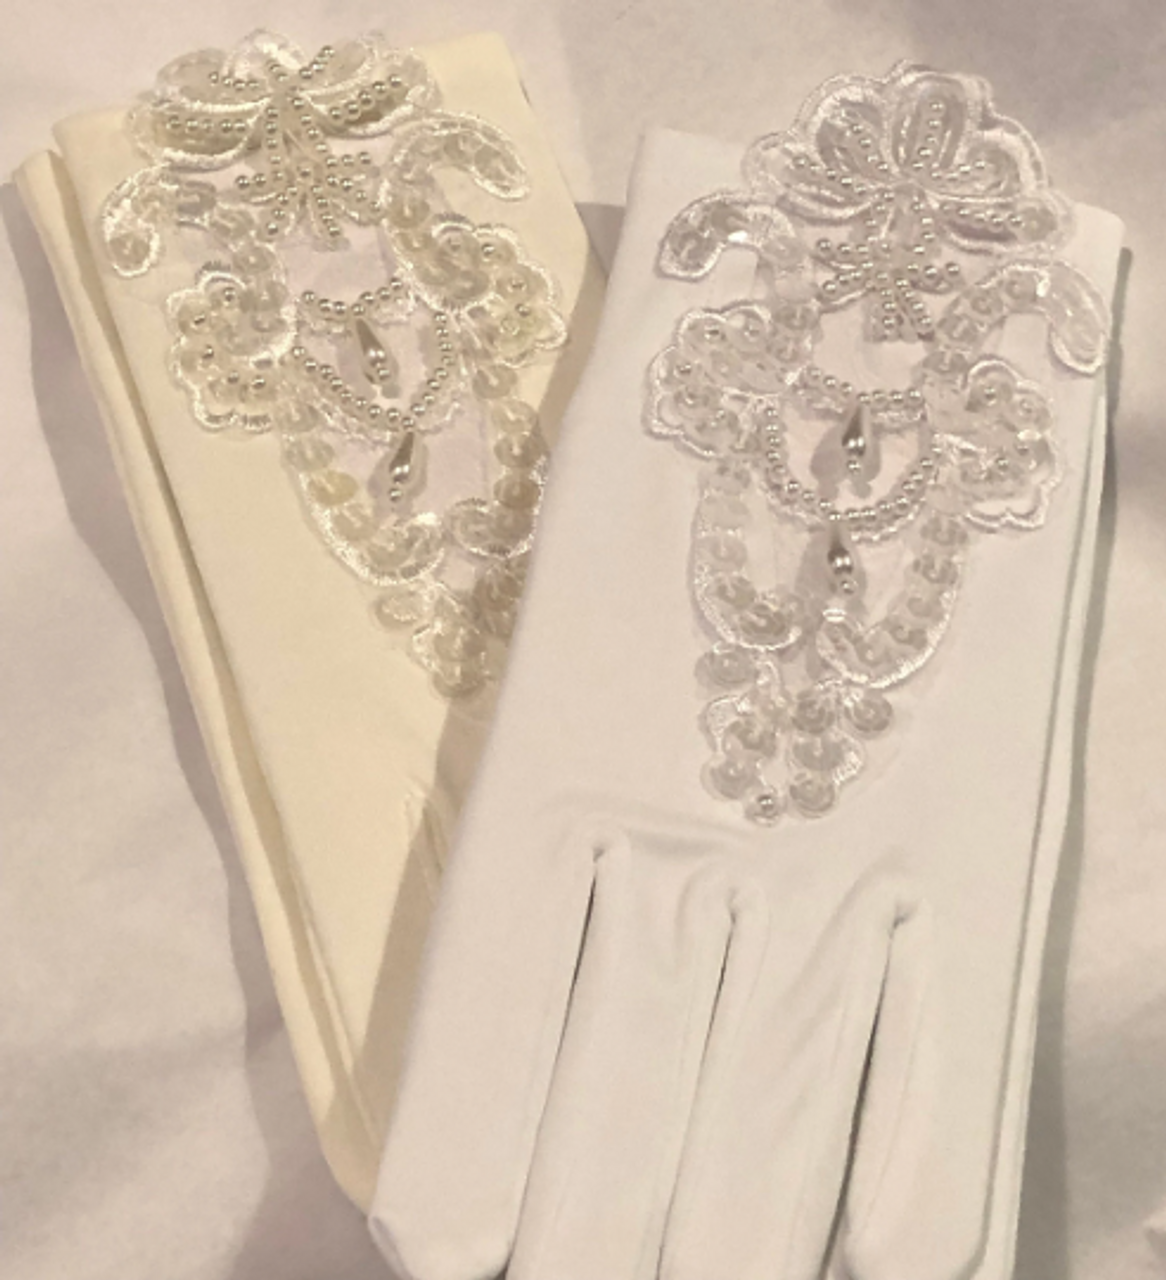 Girl's White or Ivory Embellished Lace Insert Gloves